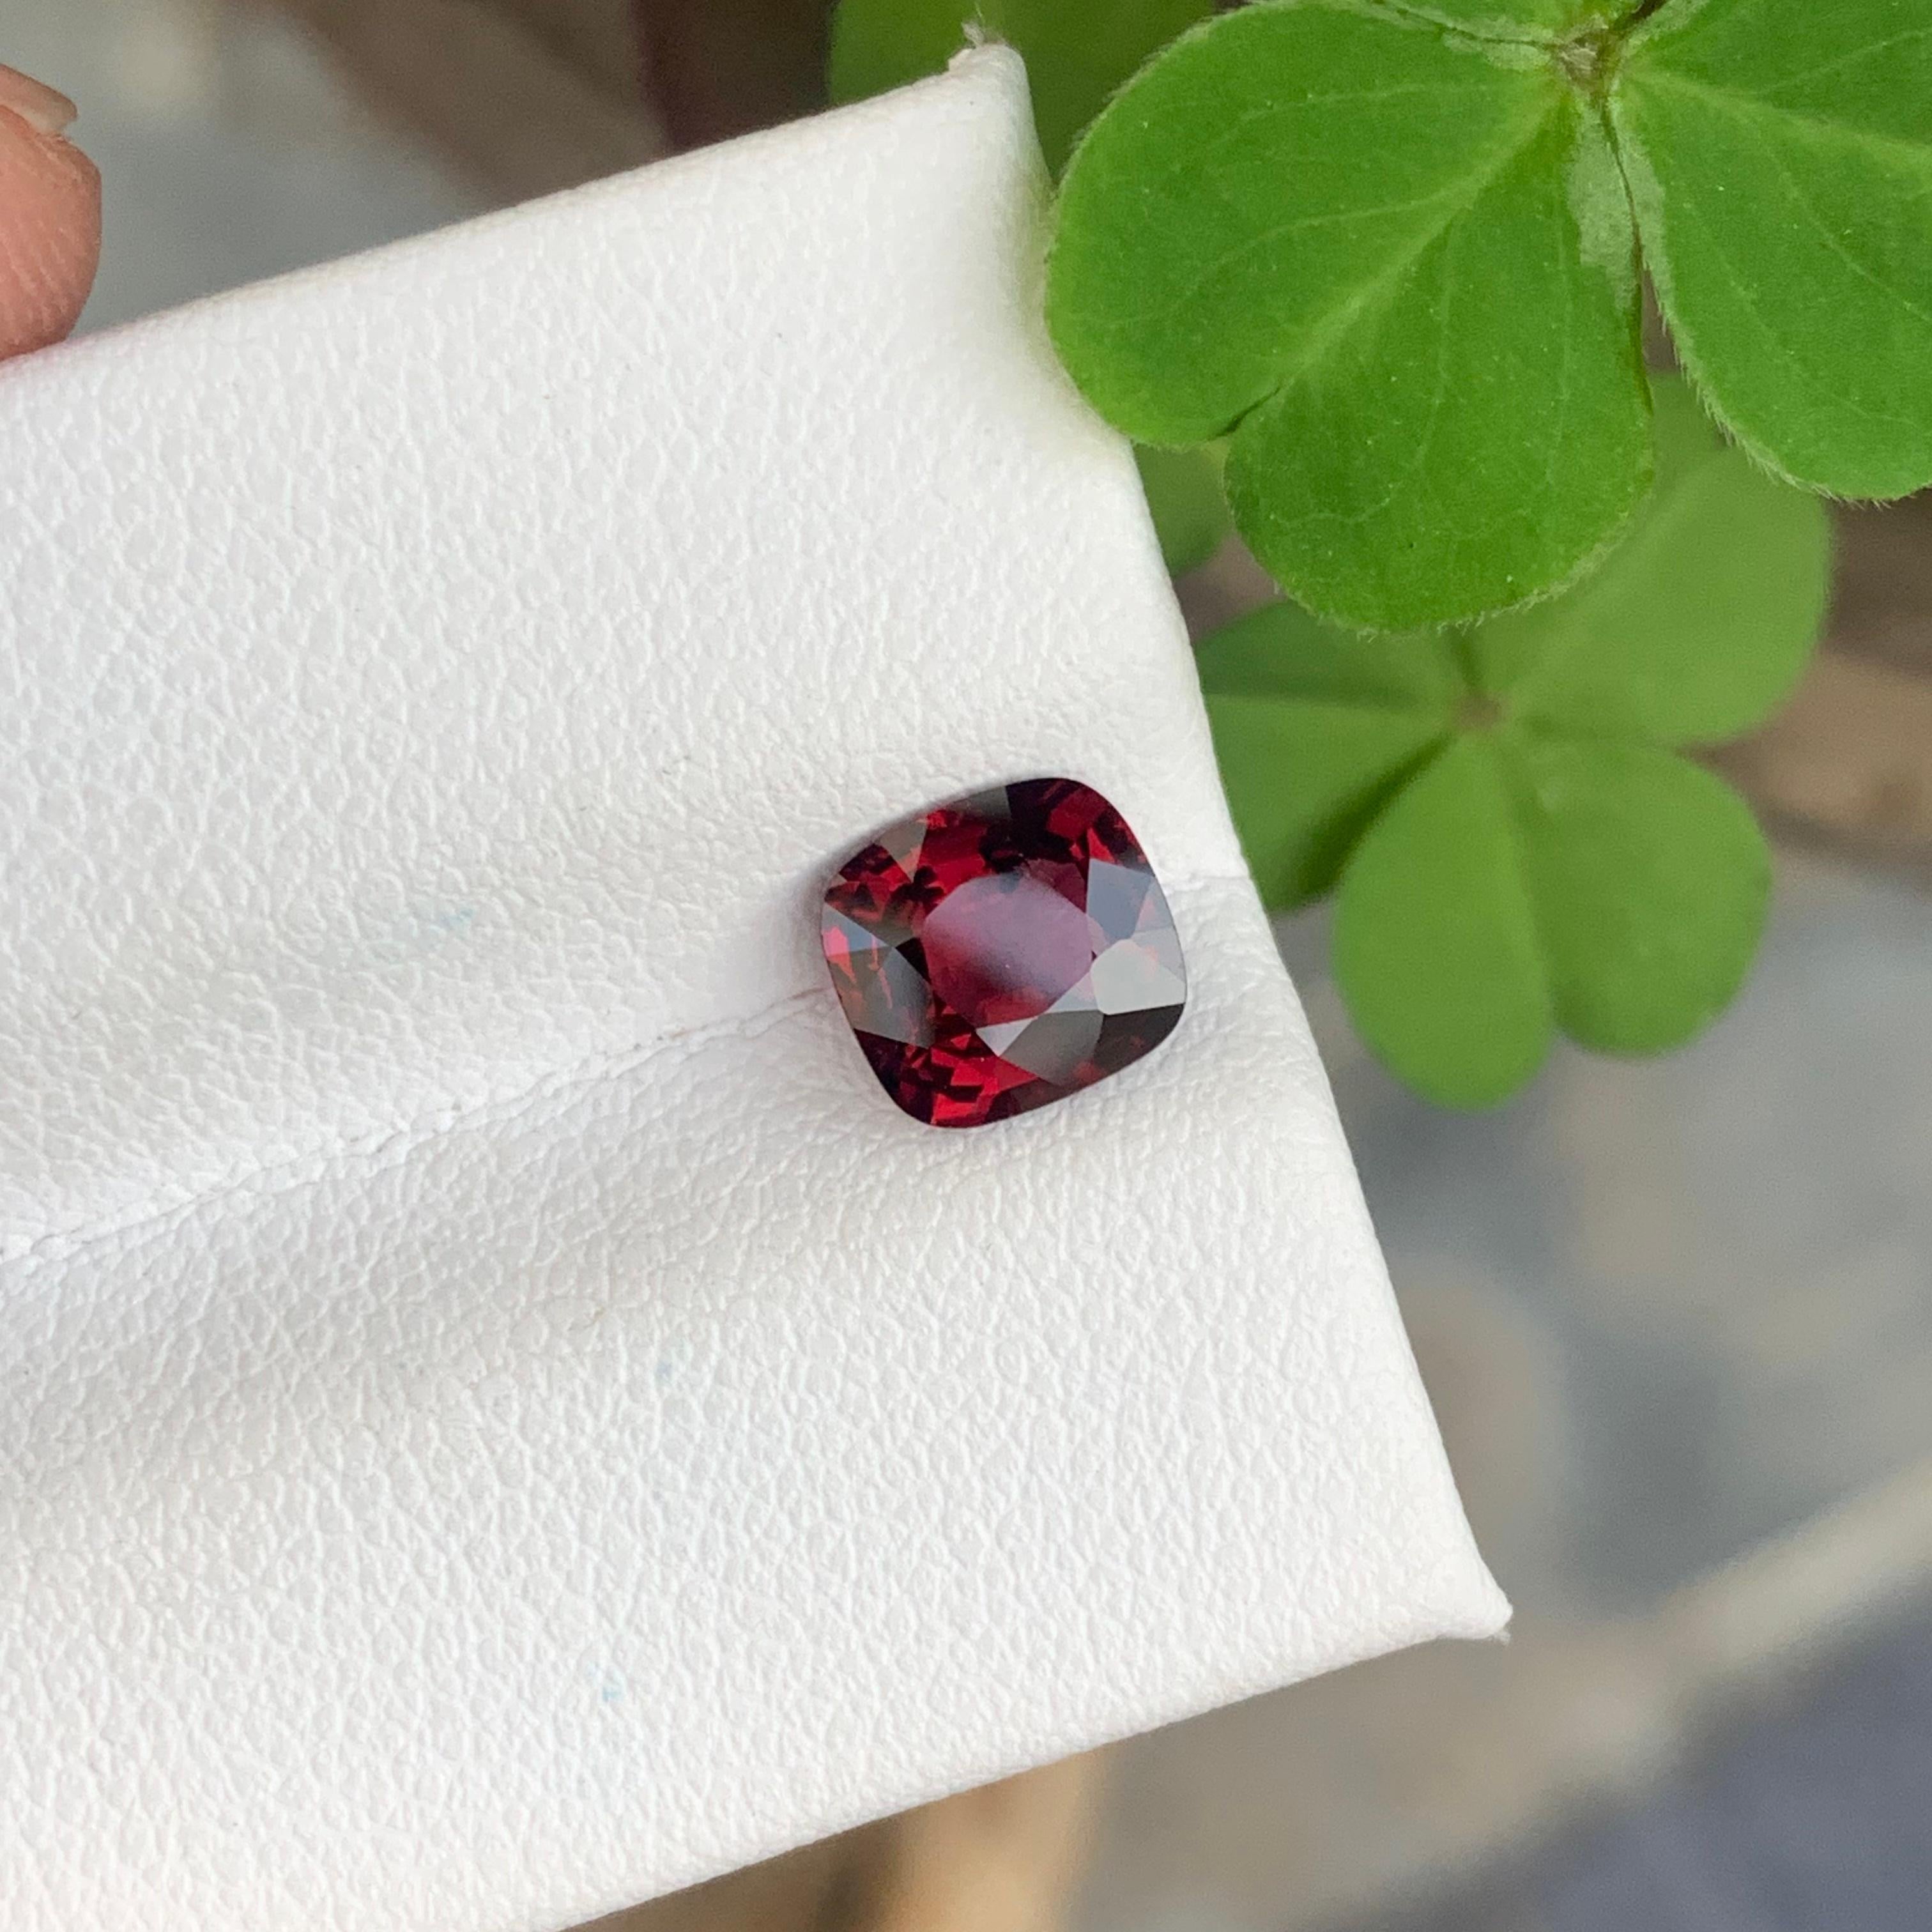 Faceted Red Spinel
Weight: 1.40 Carats
Dimension: 7x6.5x3.6 Mm
Origin: Burma Myanmar
Shape: Cushion
Color: Red
Treatment: Non / Natural
Certificate: On Demand
.
The red spinel gemstone is linked to the root chakra and is beneficial in boosting